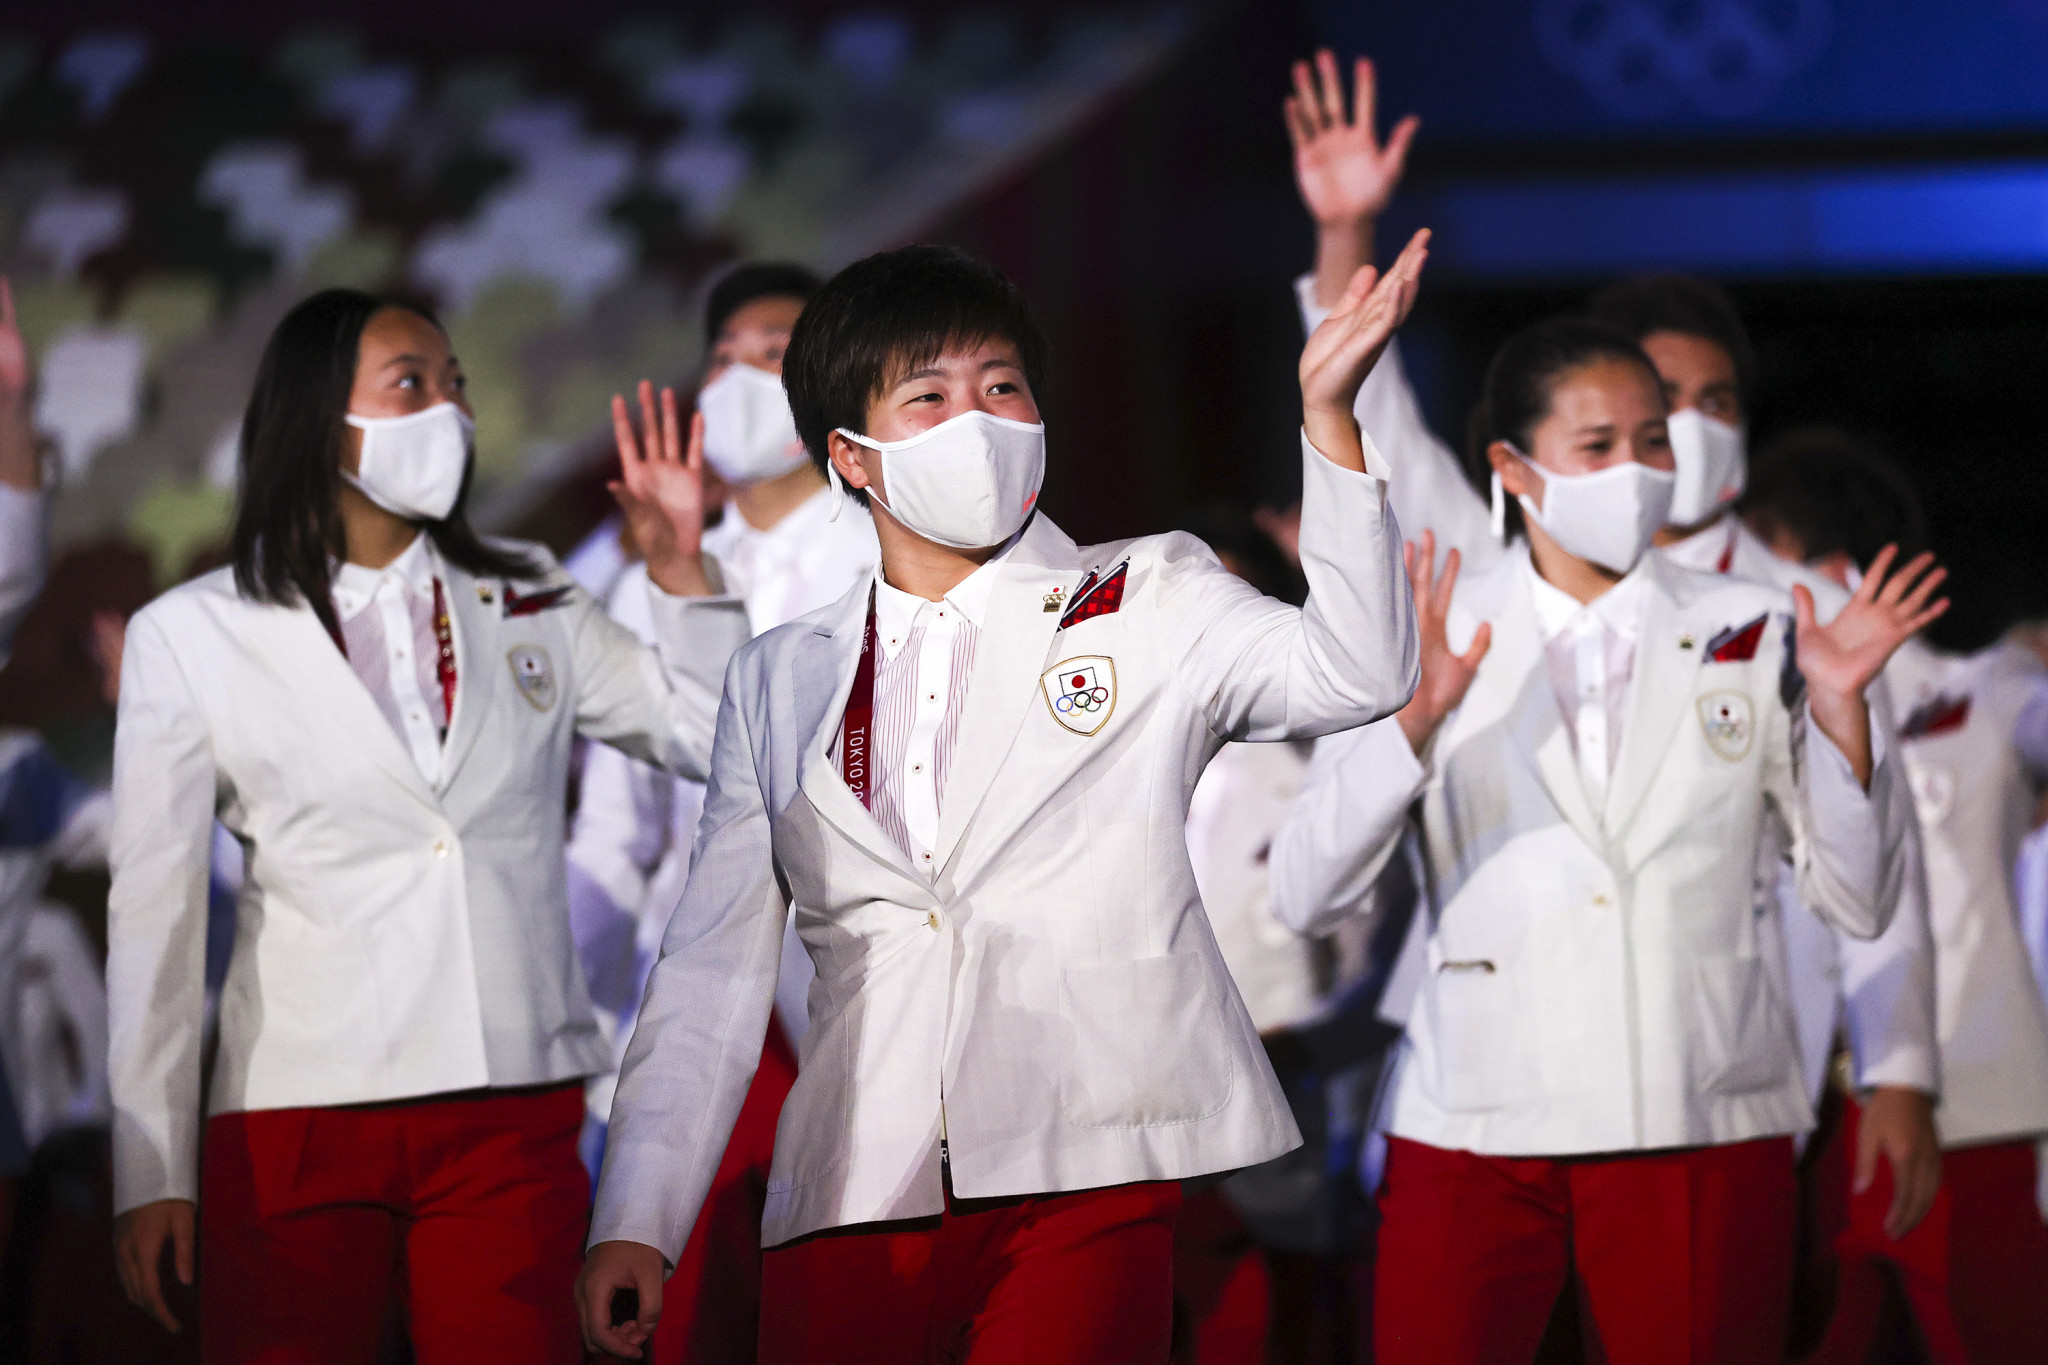 Aoki holdings provided the uniforms worn by the Japanese team at Olympic and Paralympic Opening Ceremonies in Tokyo  ©Getty Images